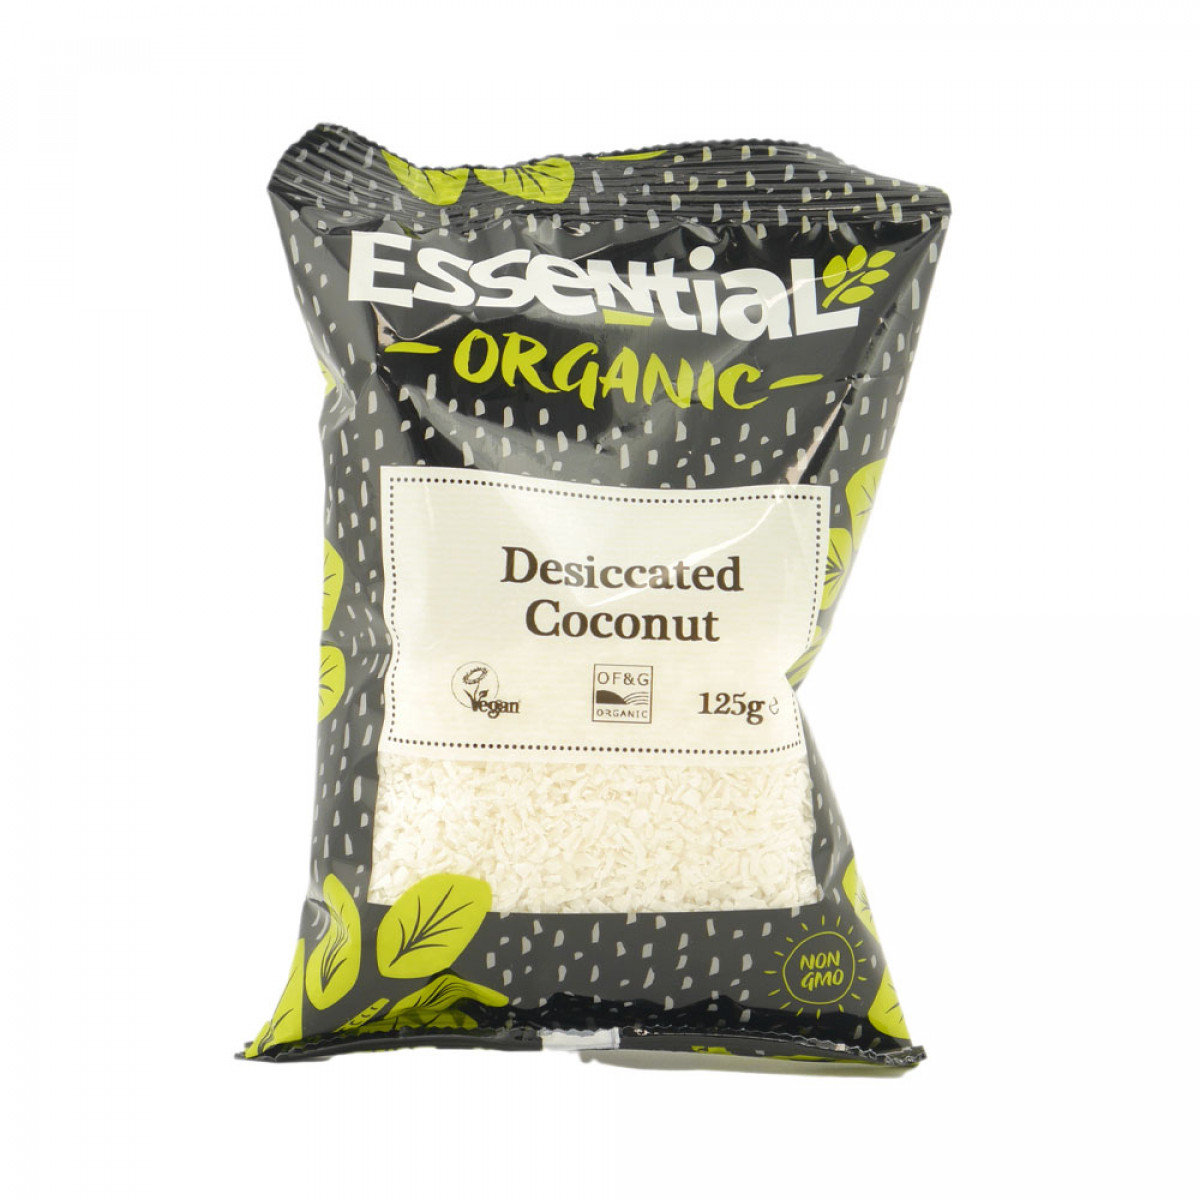 Product picture for Coconut - Desiccated